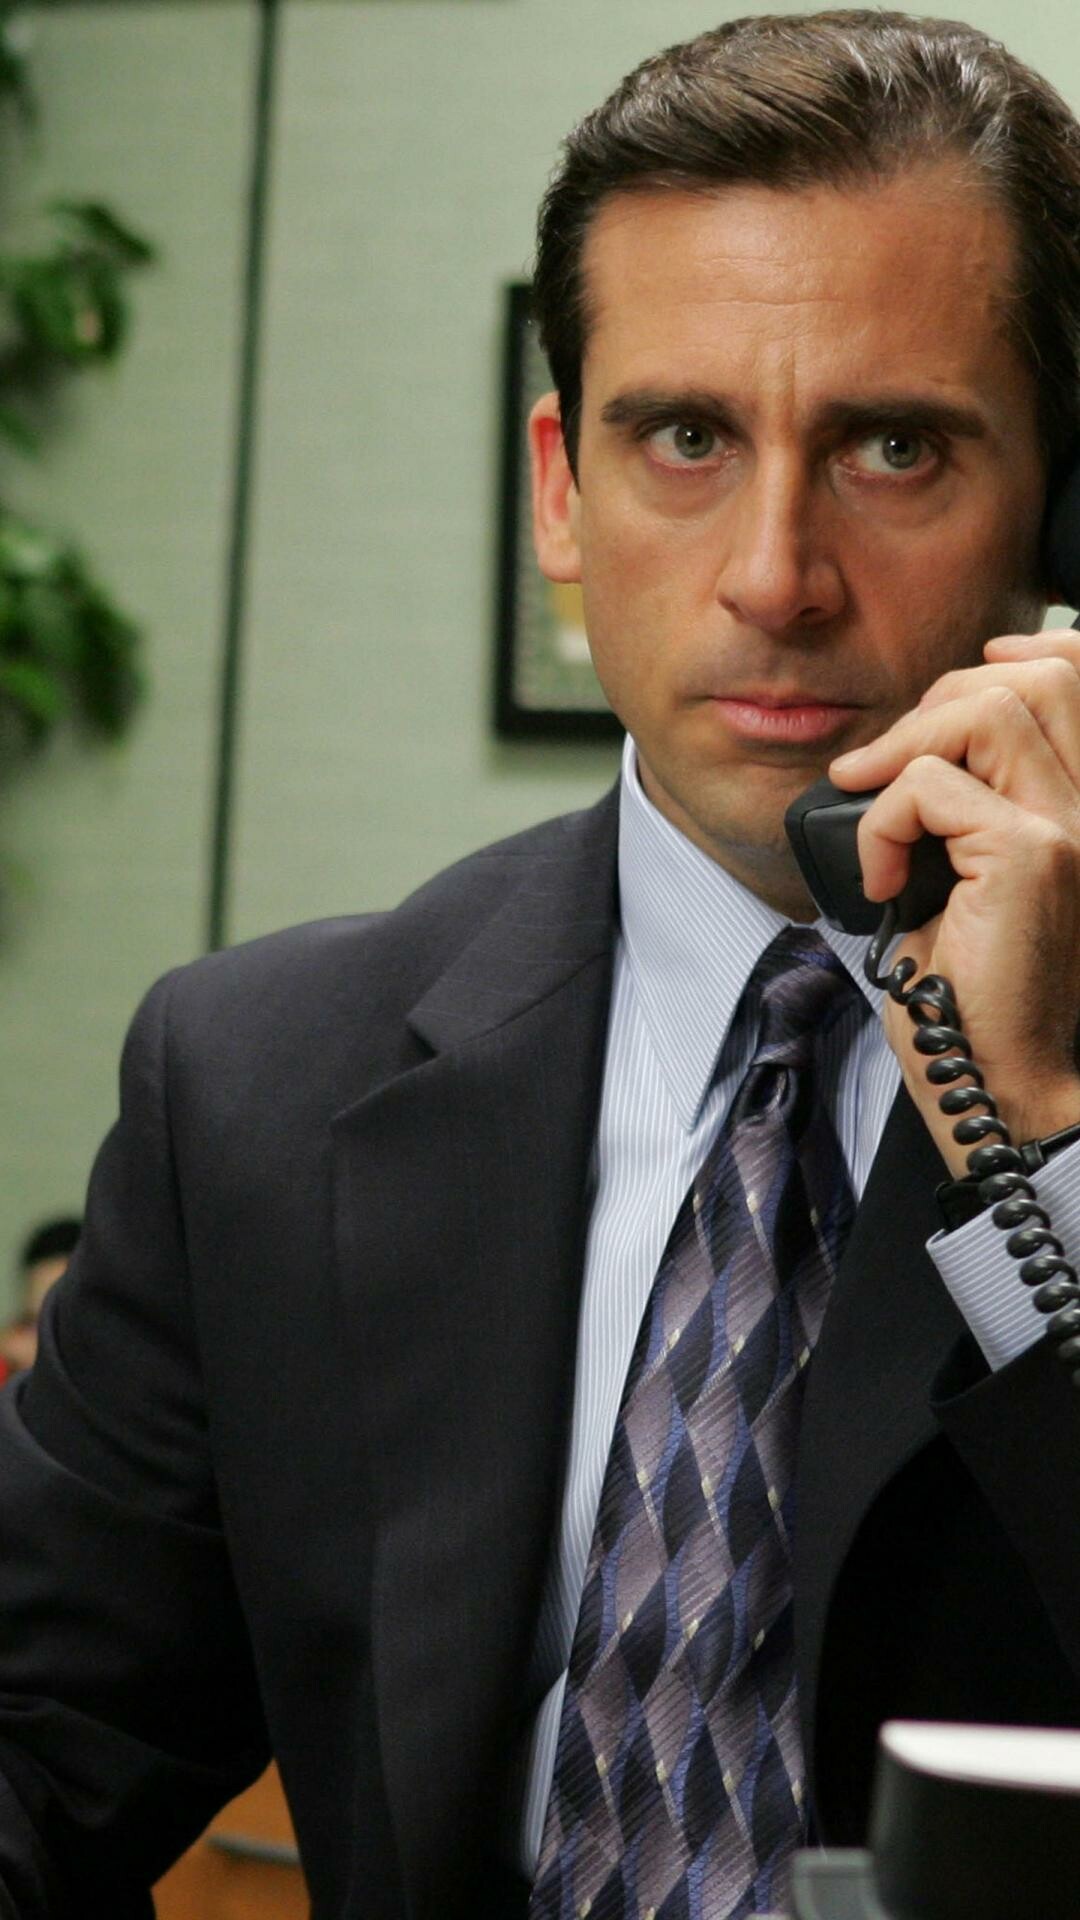 The Office (TV Series): Michael Scott, portrayed by Steve Carell and based on David Brent from the British version. 1080x1920 Full HD Wallpaper.